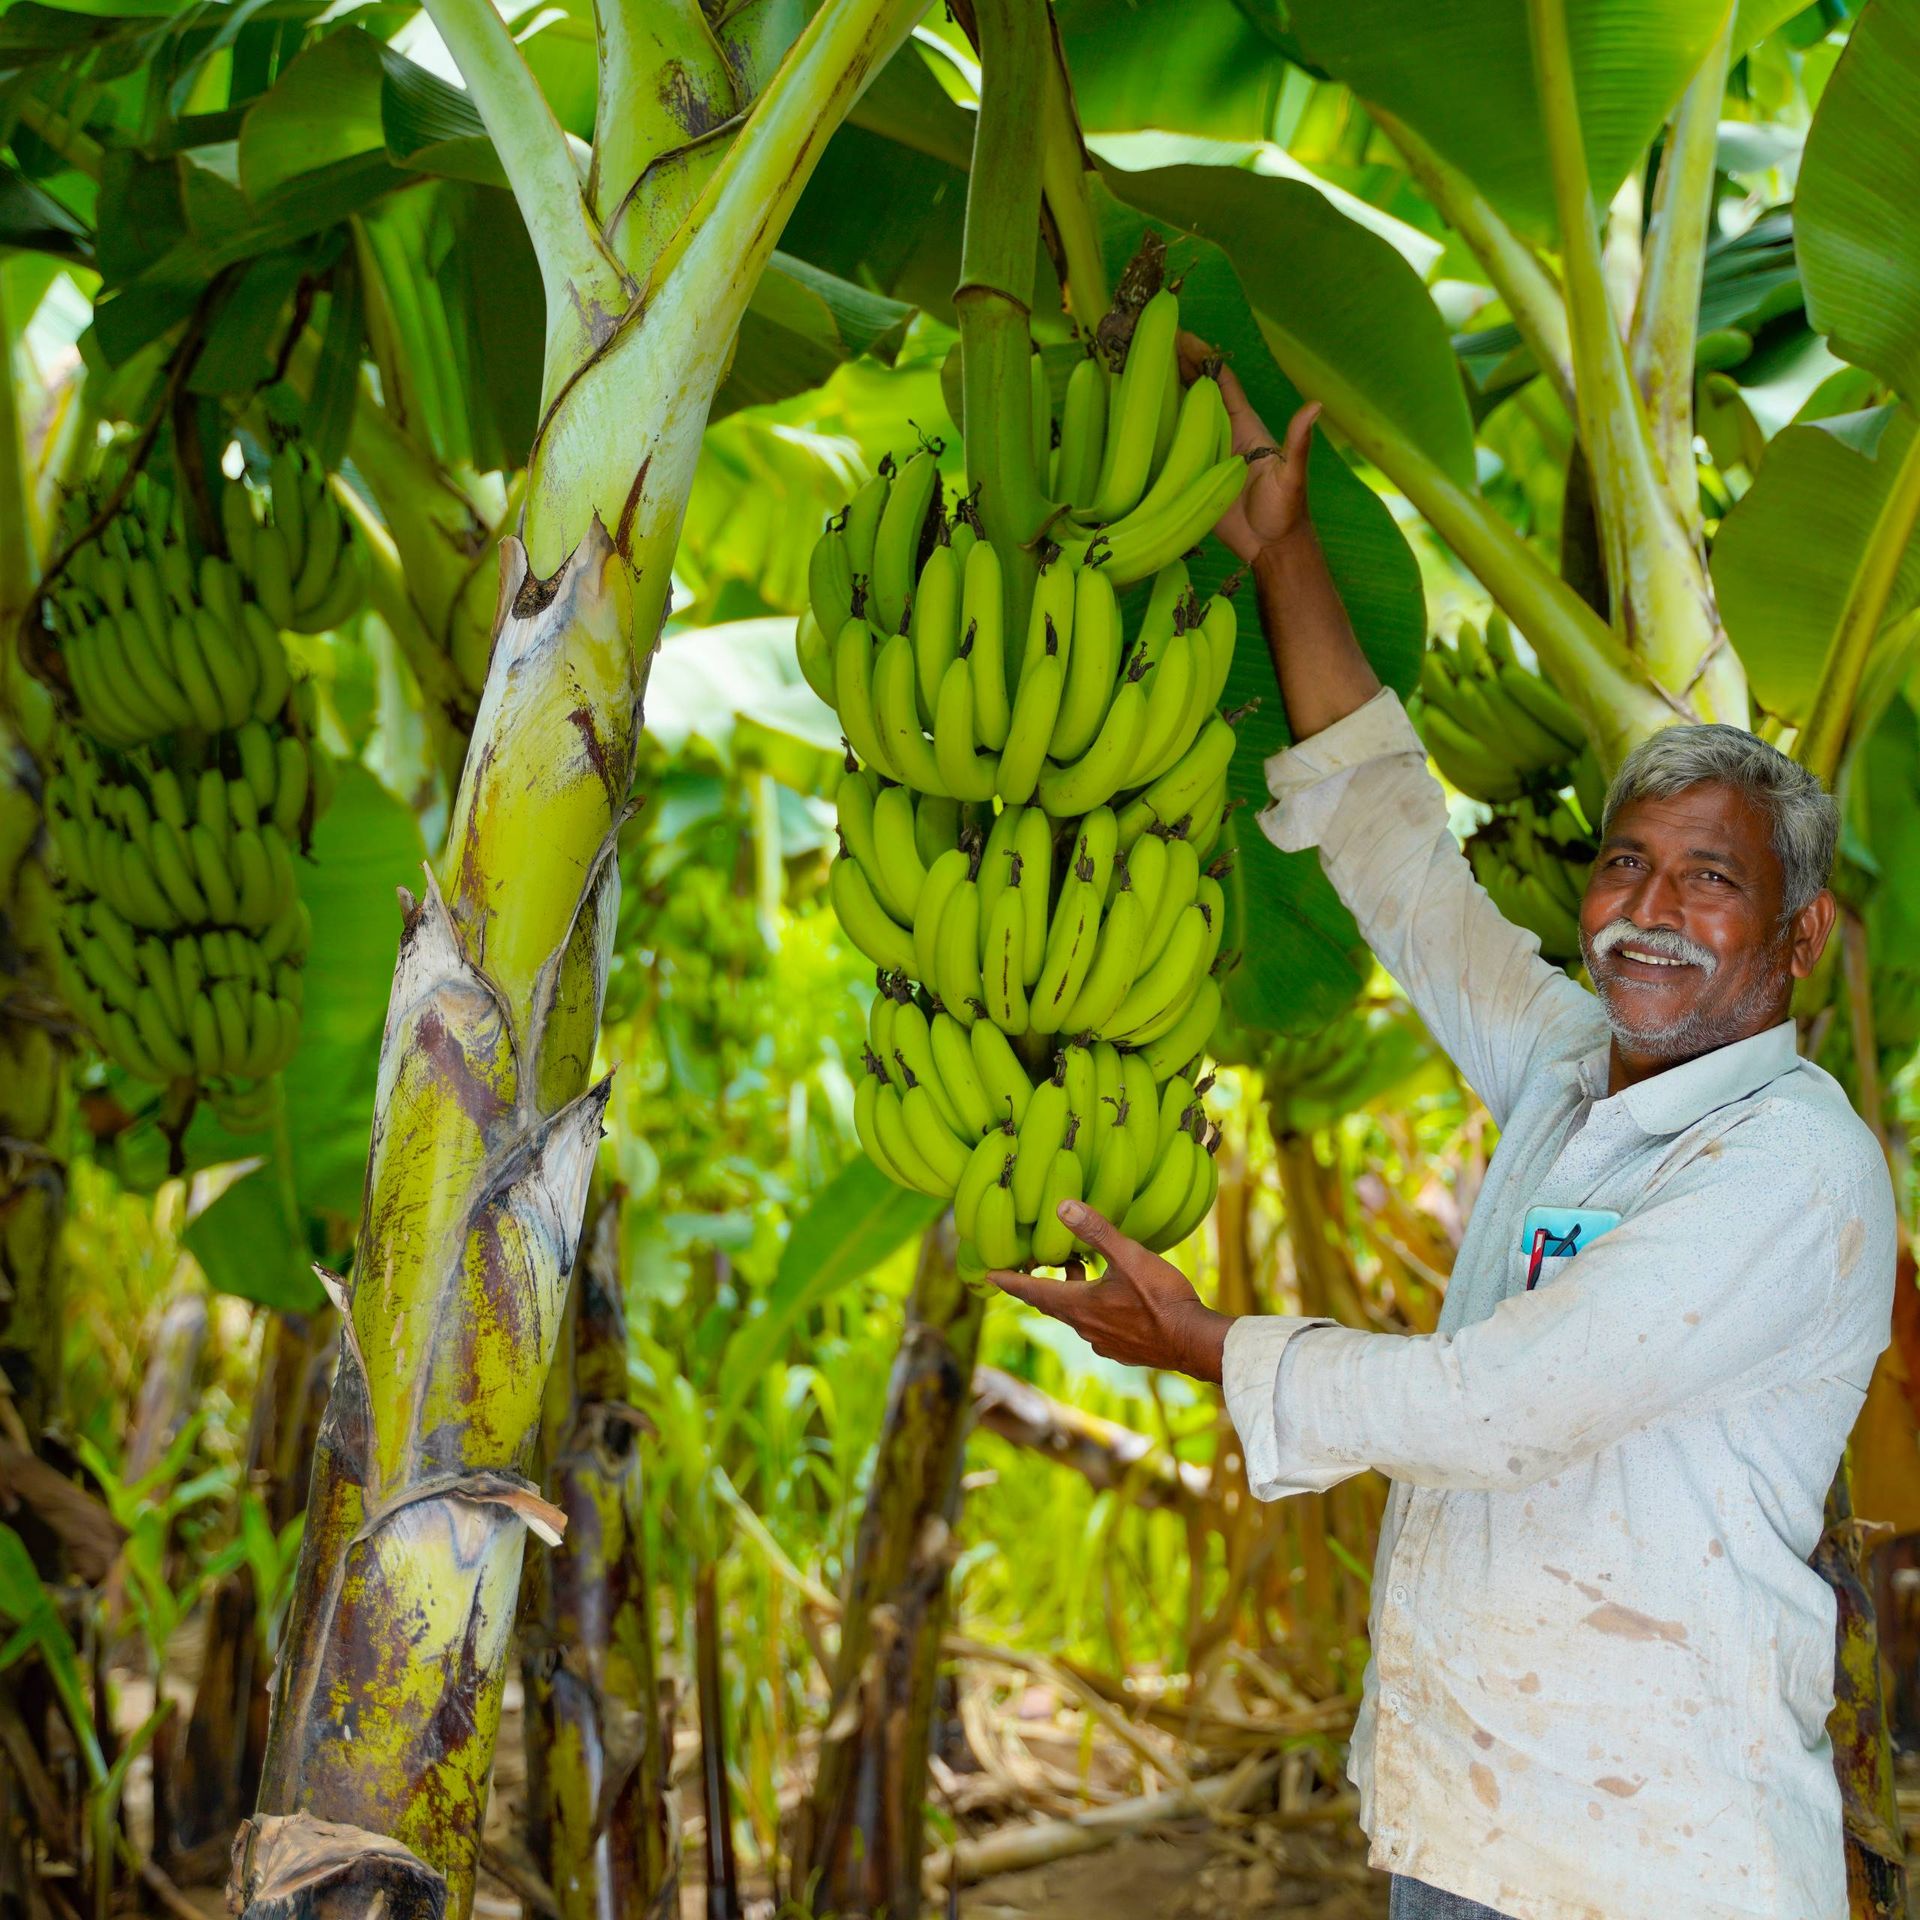 Image of a banana producer displaying produce on his farm in India